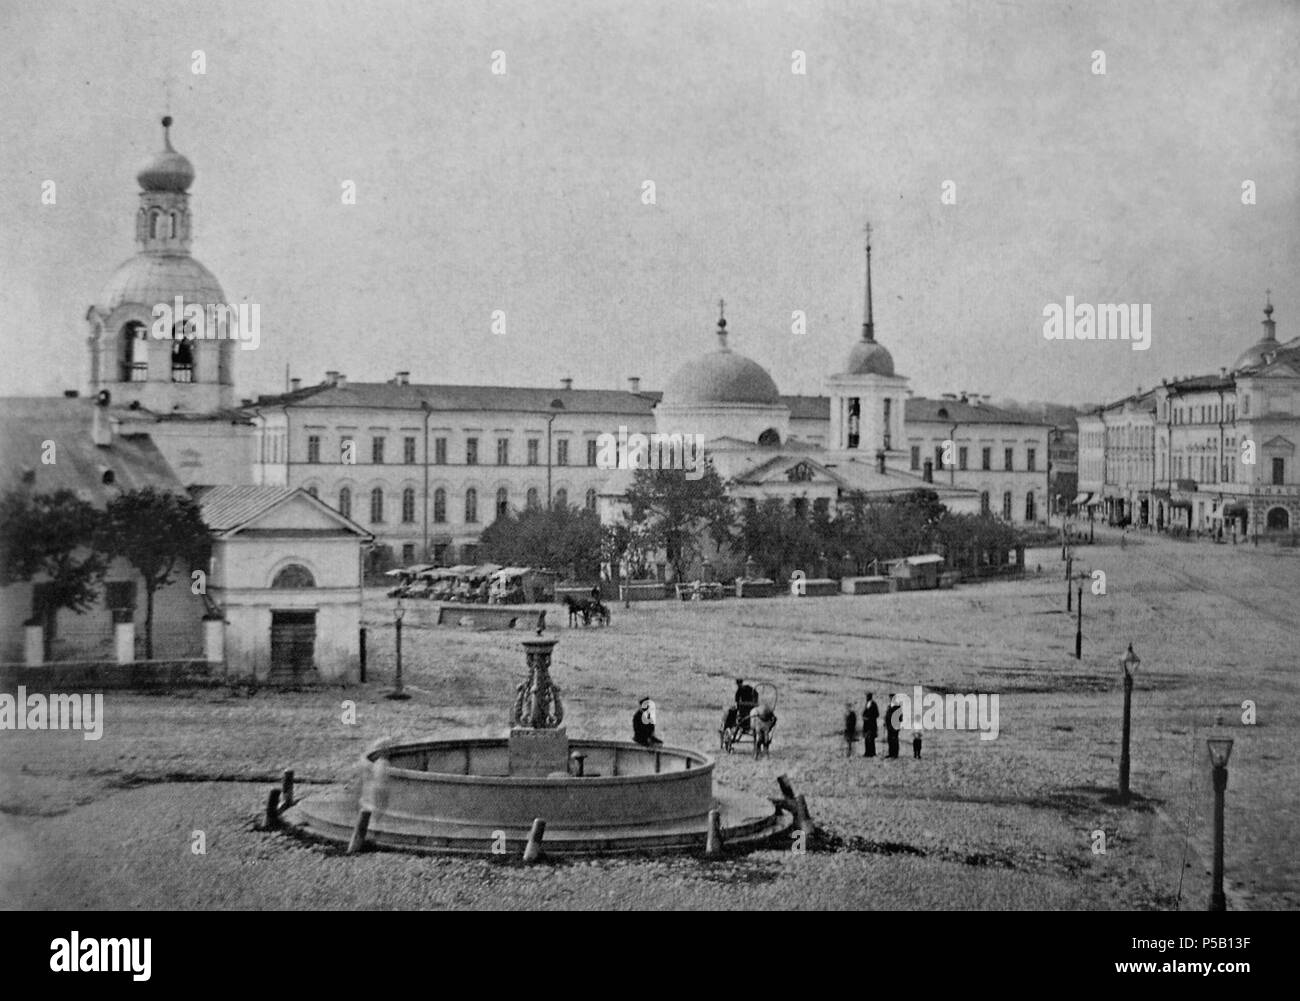 N/A. English: Annunciation Square in Nyzhny Novgorod . 1910-ths.   Andrei Osipovich Karelin  (1837–1906)     Alternative names : ,   - translit. ISO Andre Osipovich Karelin  Description Russian painter and photographer  Date of birth/death 16 July 1837 12 August 1906 / 13 August 1906  Location of birth/death Tambov Governorate Nizhny Novgorod  Authority control  : Q3631988 VIAF:8196521 ISNI:0000 0000 8087 8649 ULAN:500082996 LCCN:no93021510 Open Library:OL6305149A WorldCat 207 Blagovestchenskaya Square NNovgorod 1910 Karelin Stock Photo